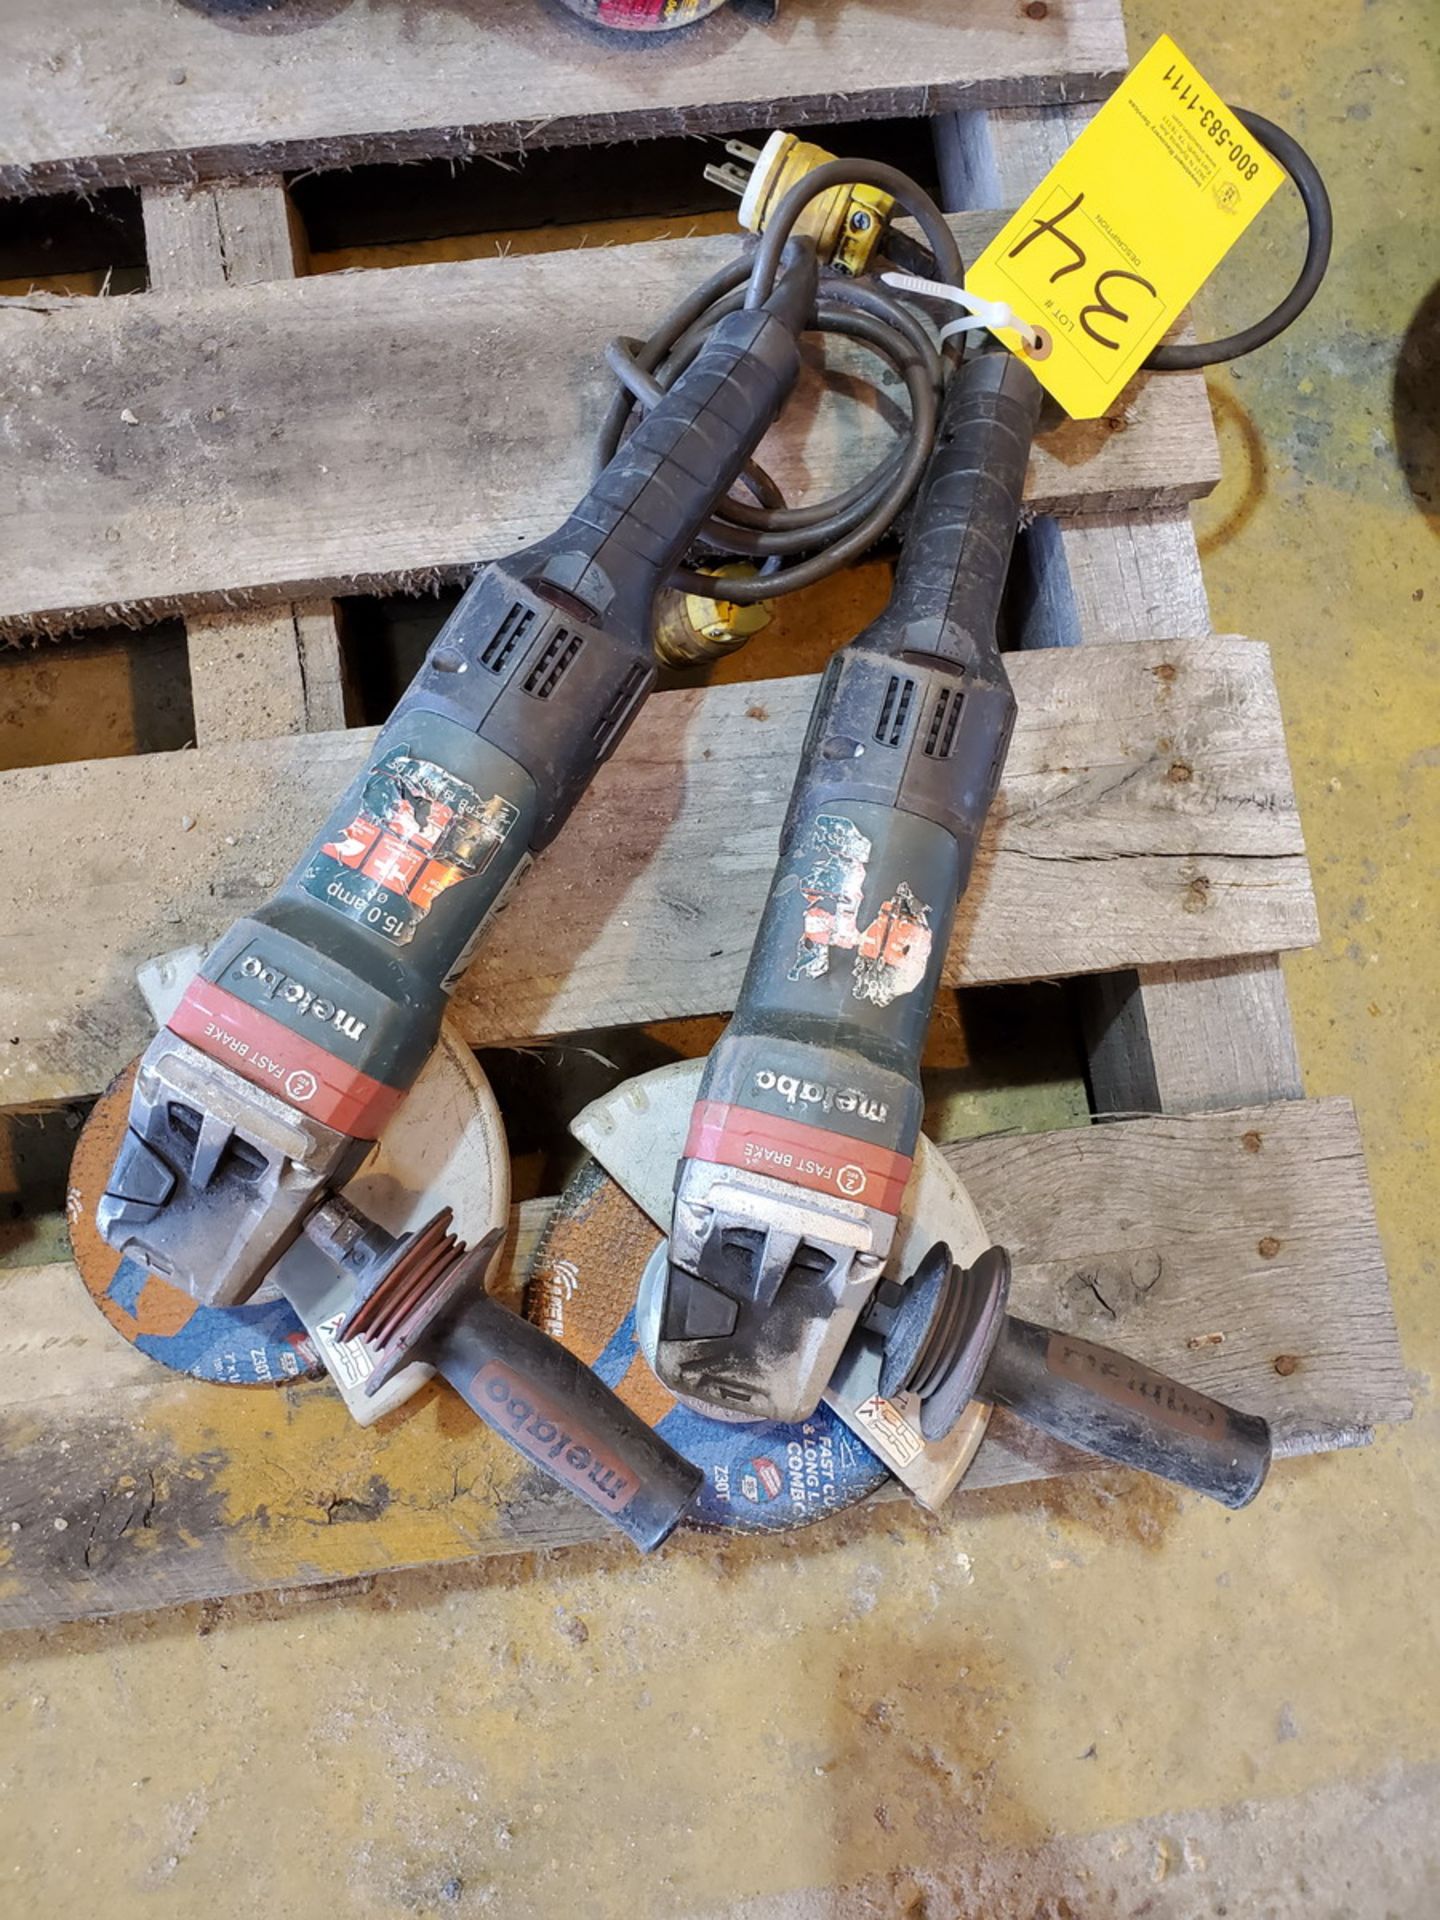 Metabo WEPB19-180 (2) 7" Angle Grinders 15A, 120V, 50/60HZ - Image 2 of 2